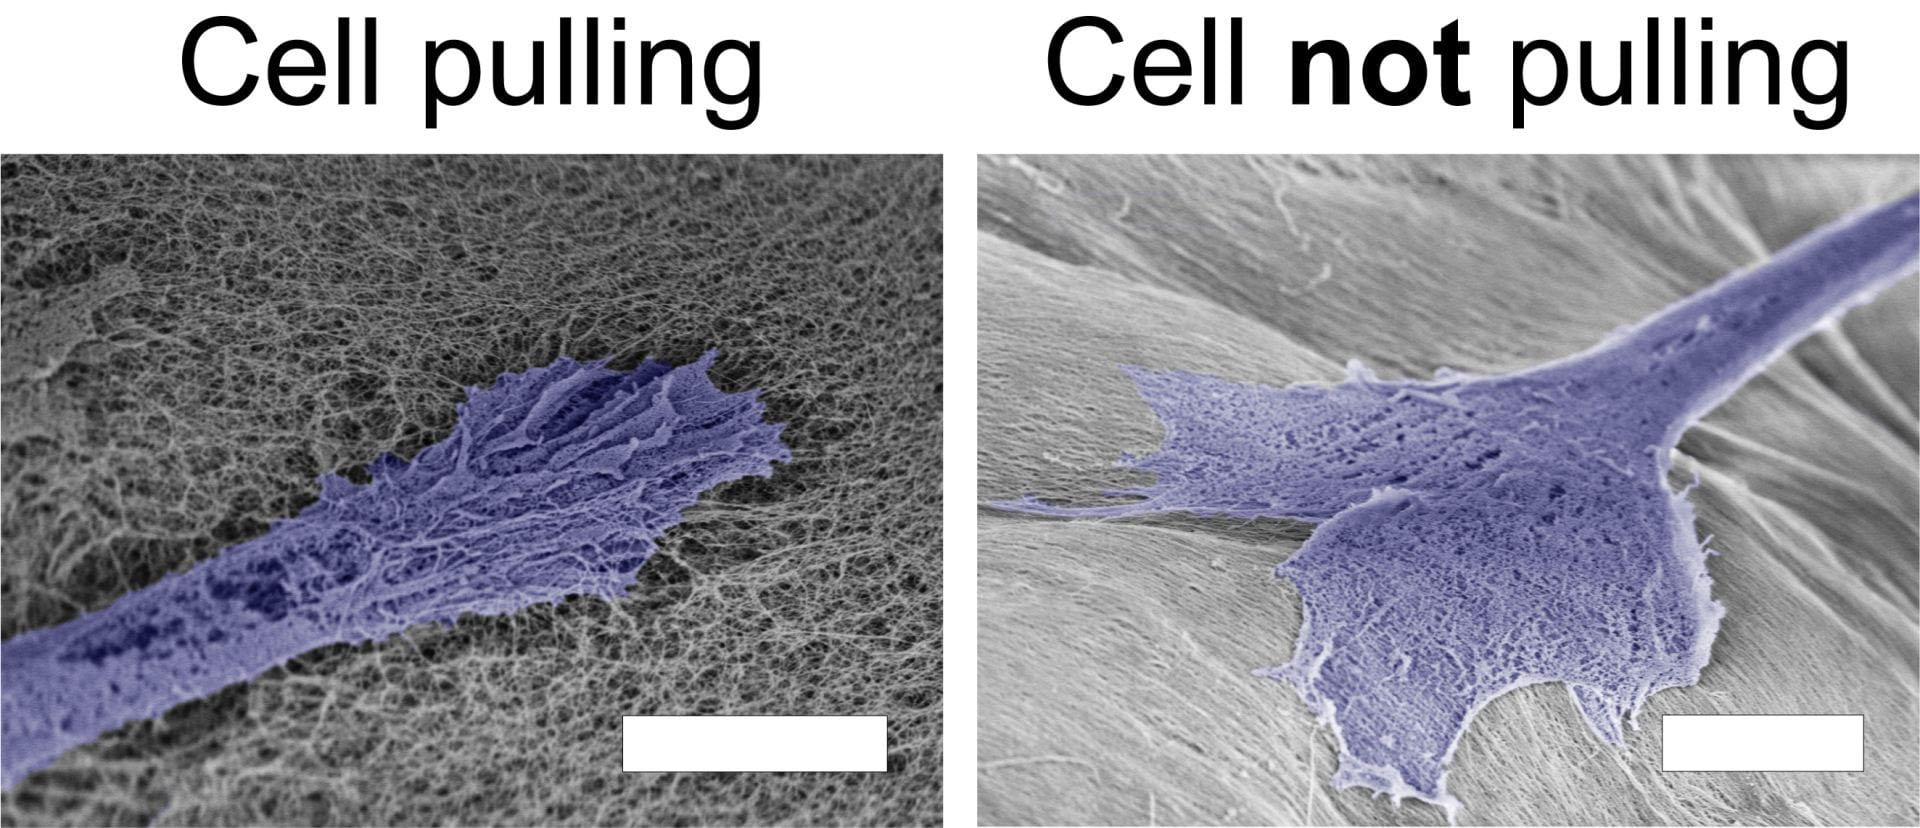 Scanning electron micrographs of cells pulling on nanofibers with lower alignments, but not pulling on nanofibers with higher alignments